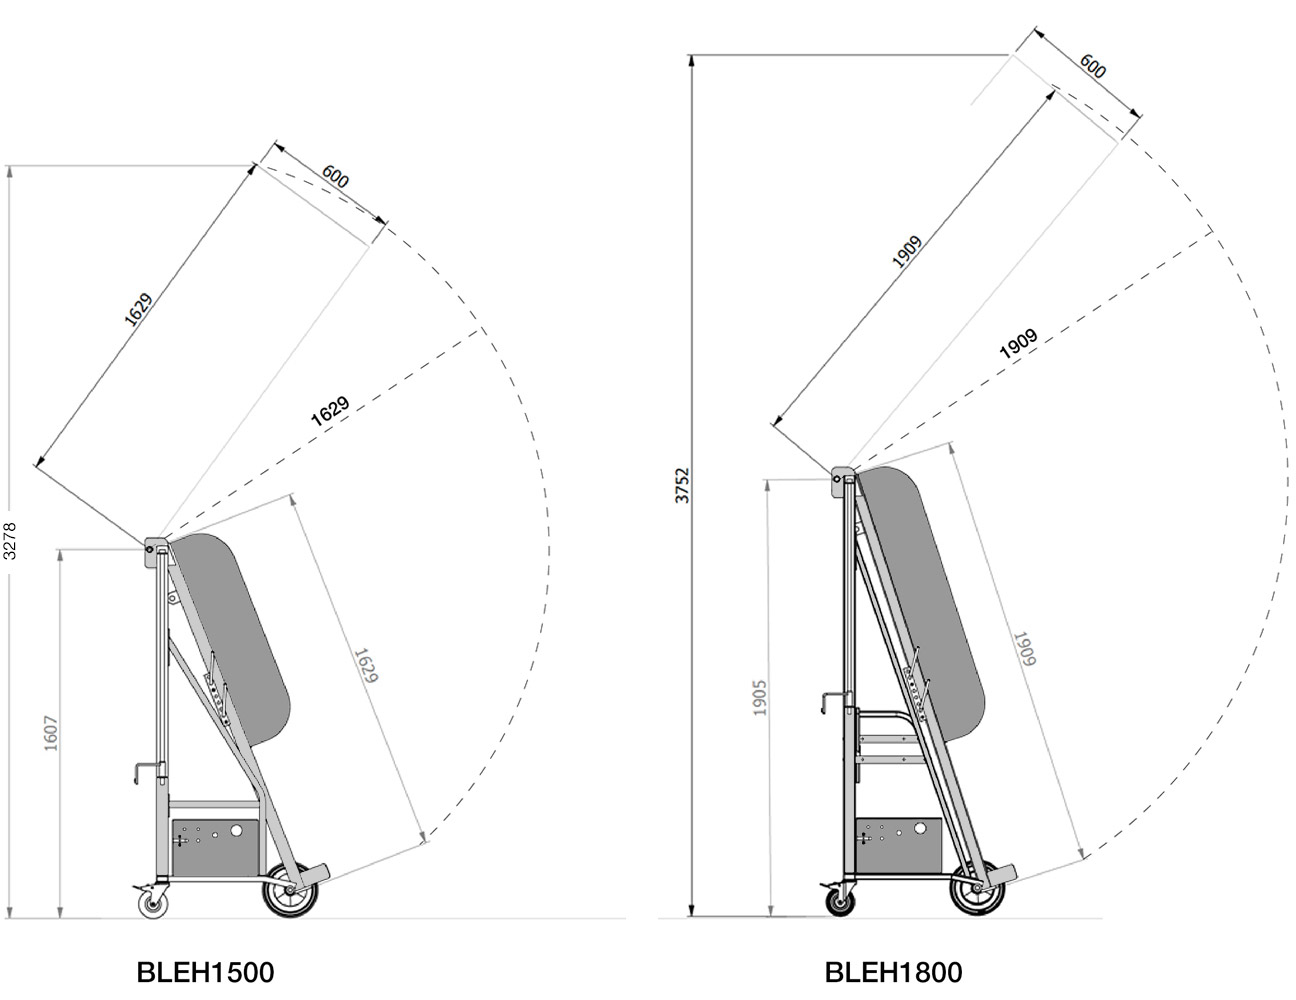 The lifting height and swept radius of the Liftmaster Rugged bin lifter